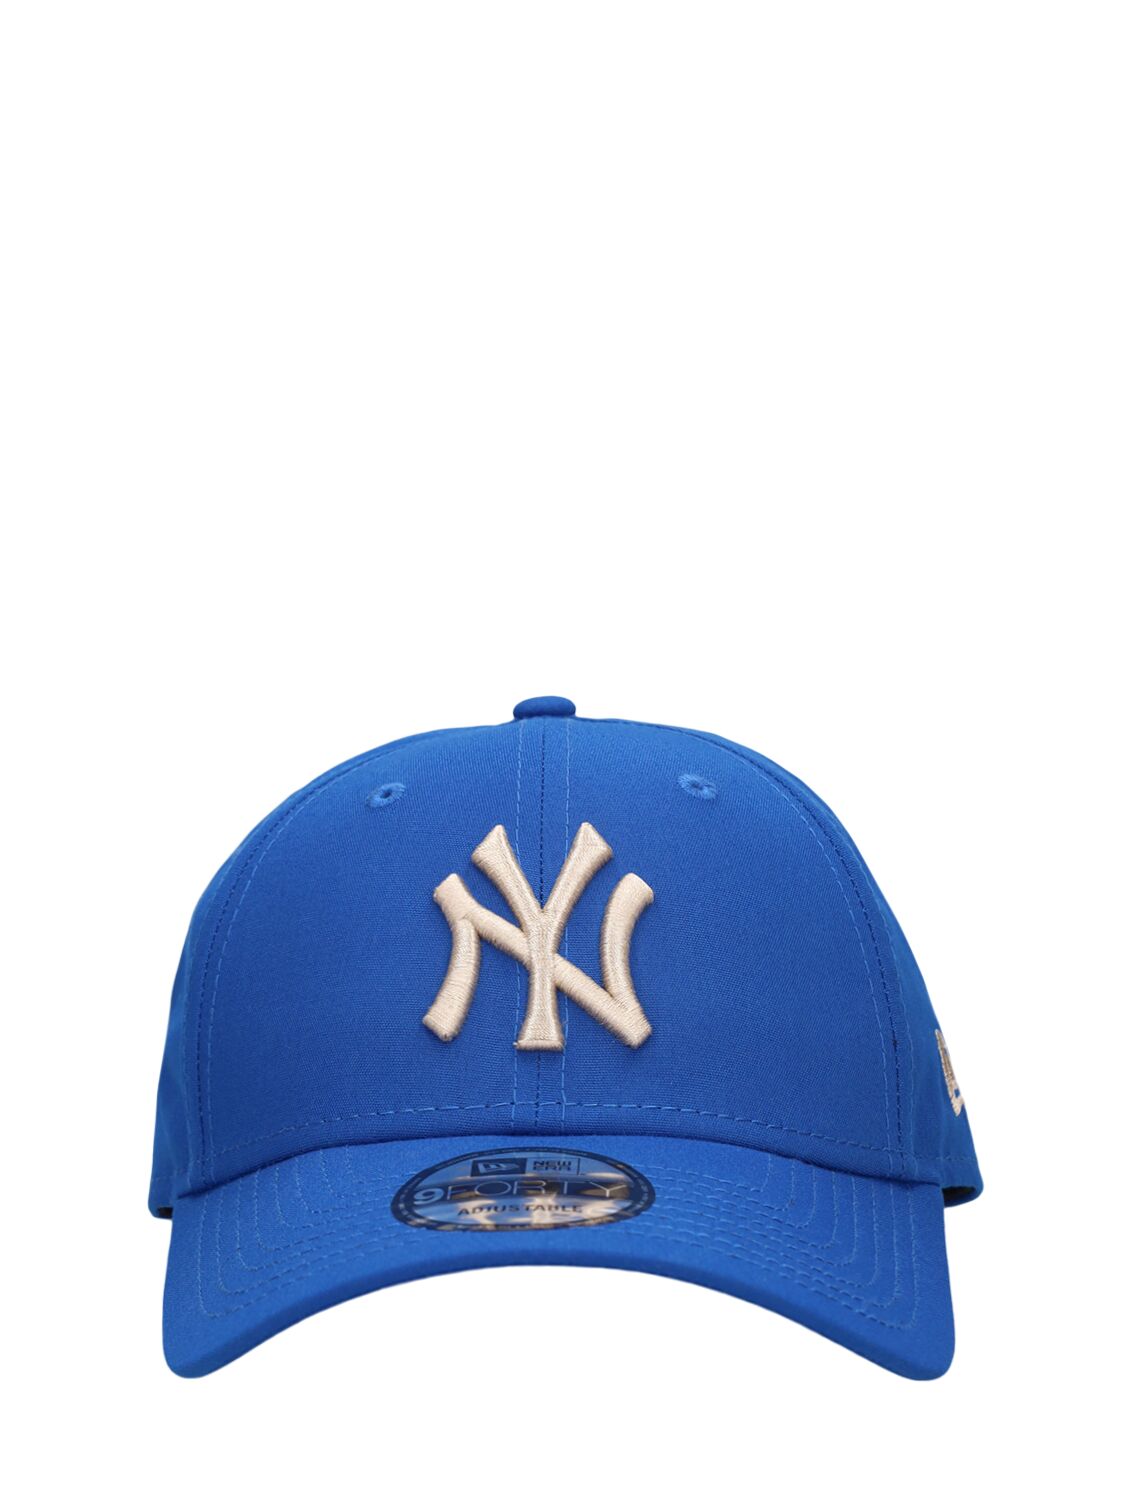 New Era Ny Yankees Repreve 9forty Tech Cap In Blue